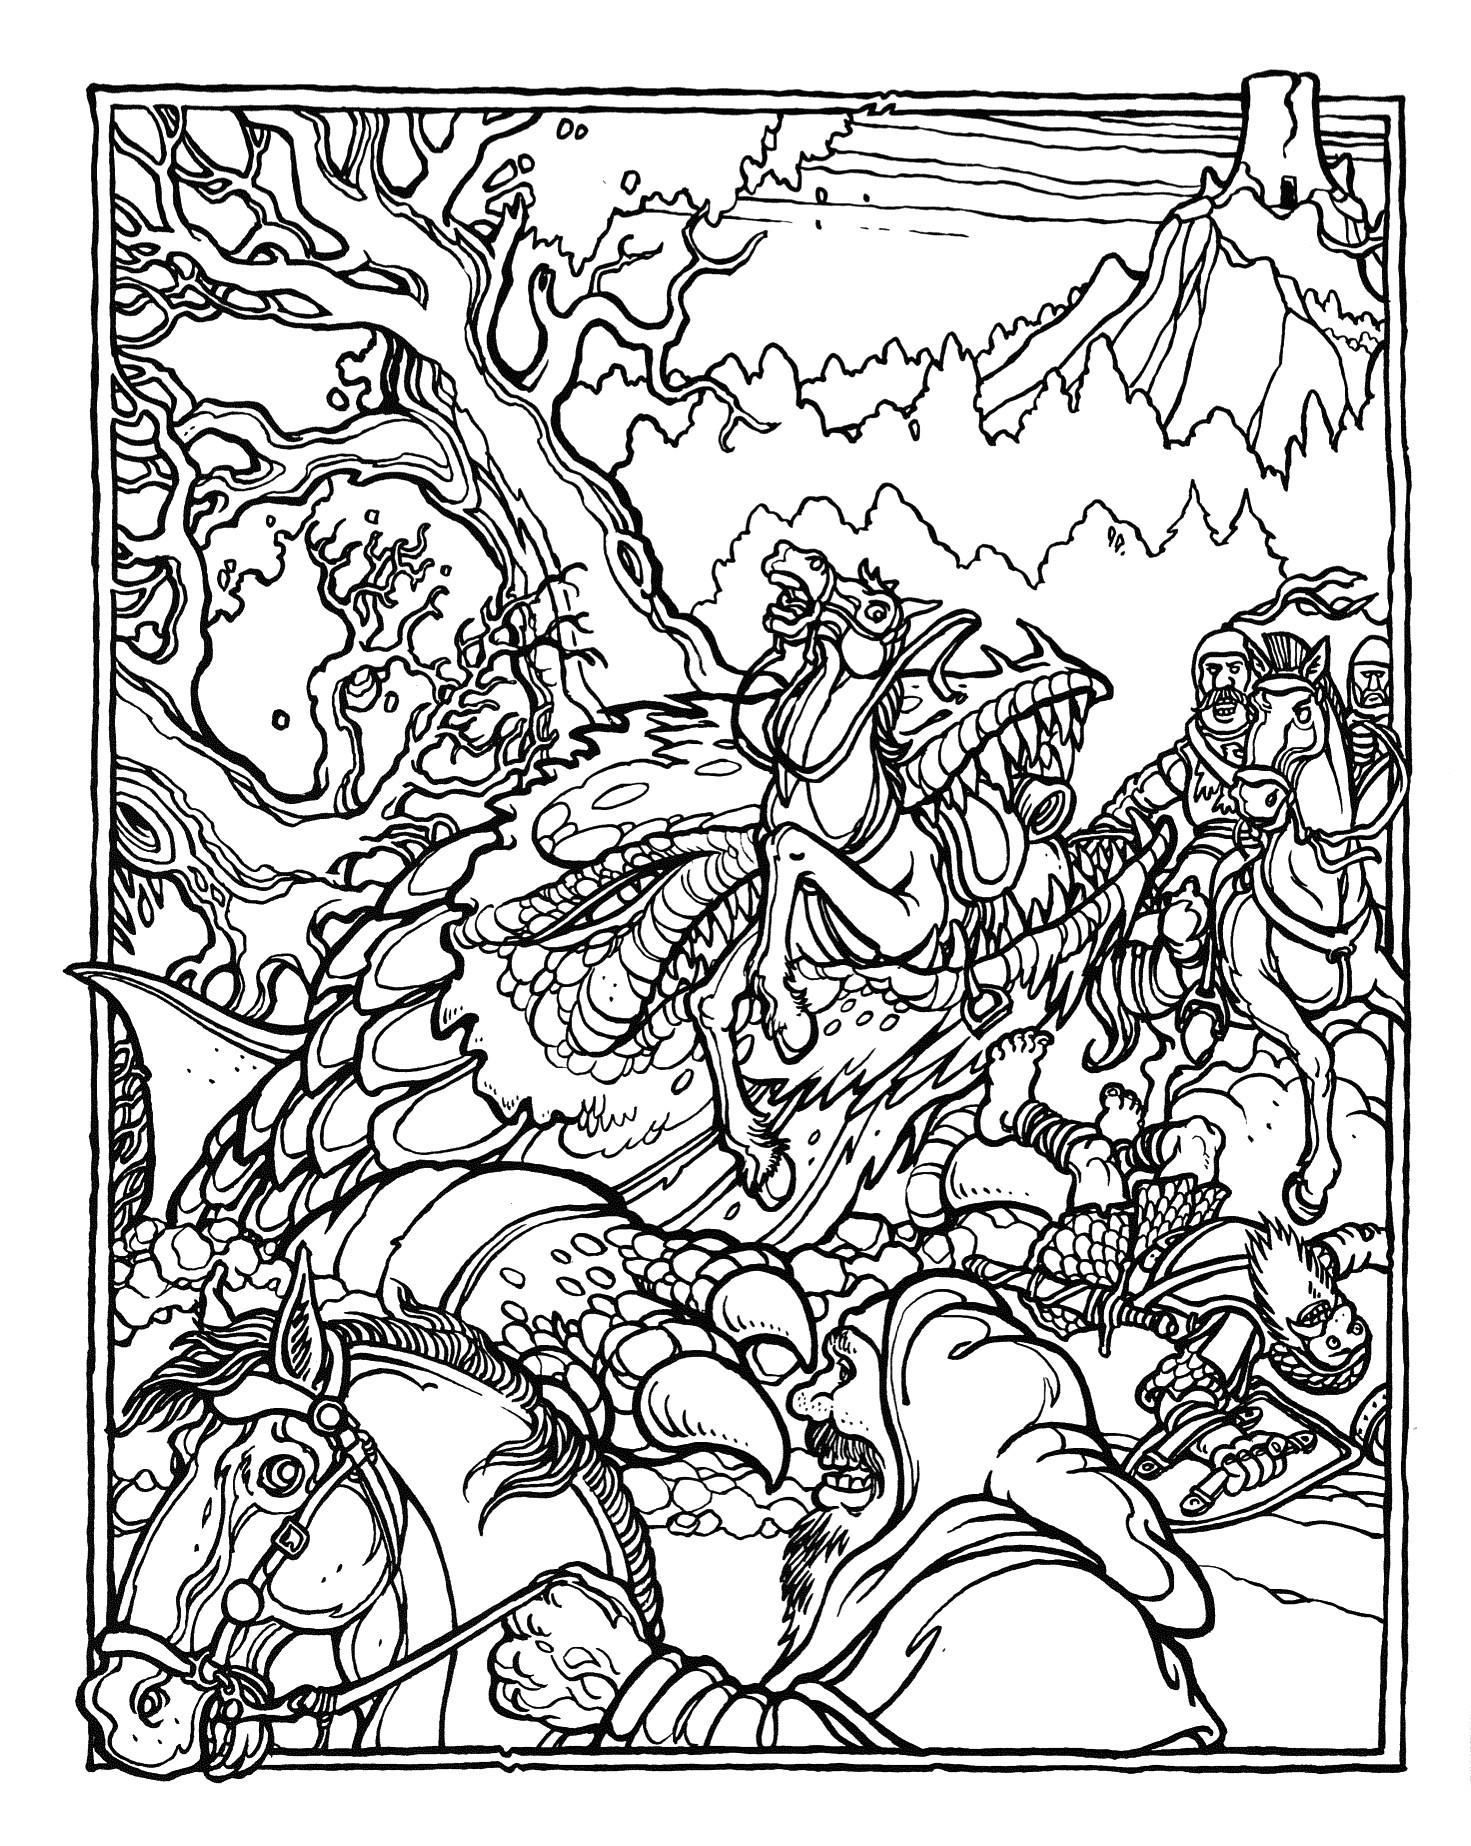 D&amp;D Coloring Pages
 MONSTER BRAINS The ficial Advanced Dungeons and Dragons